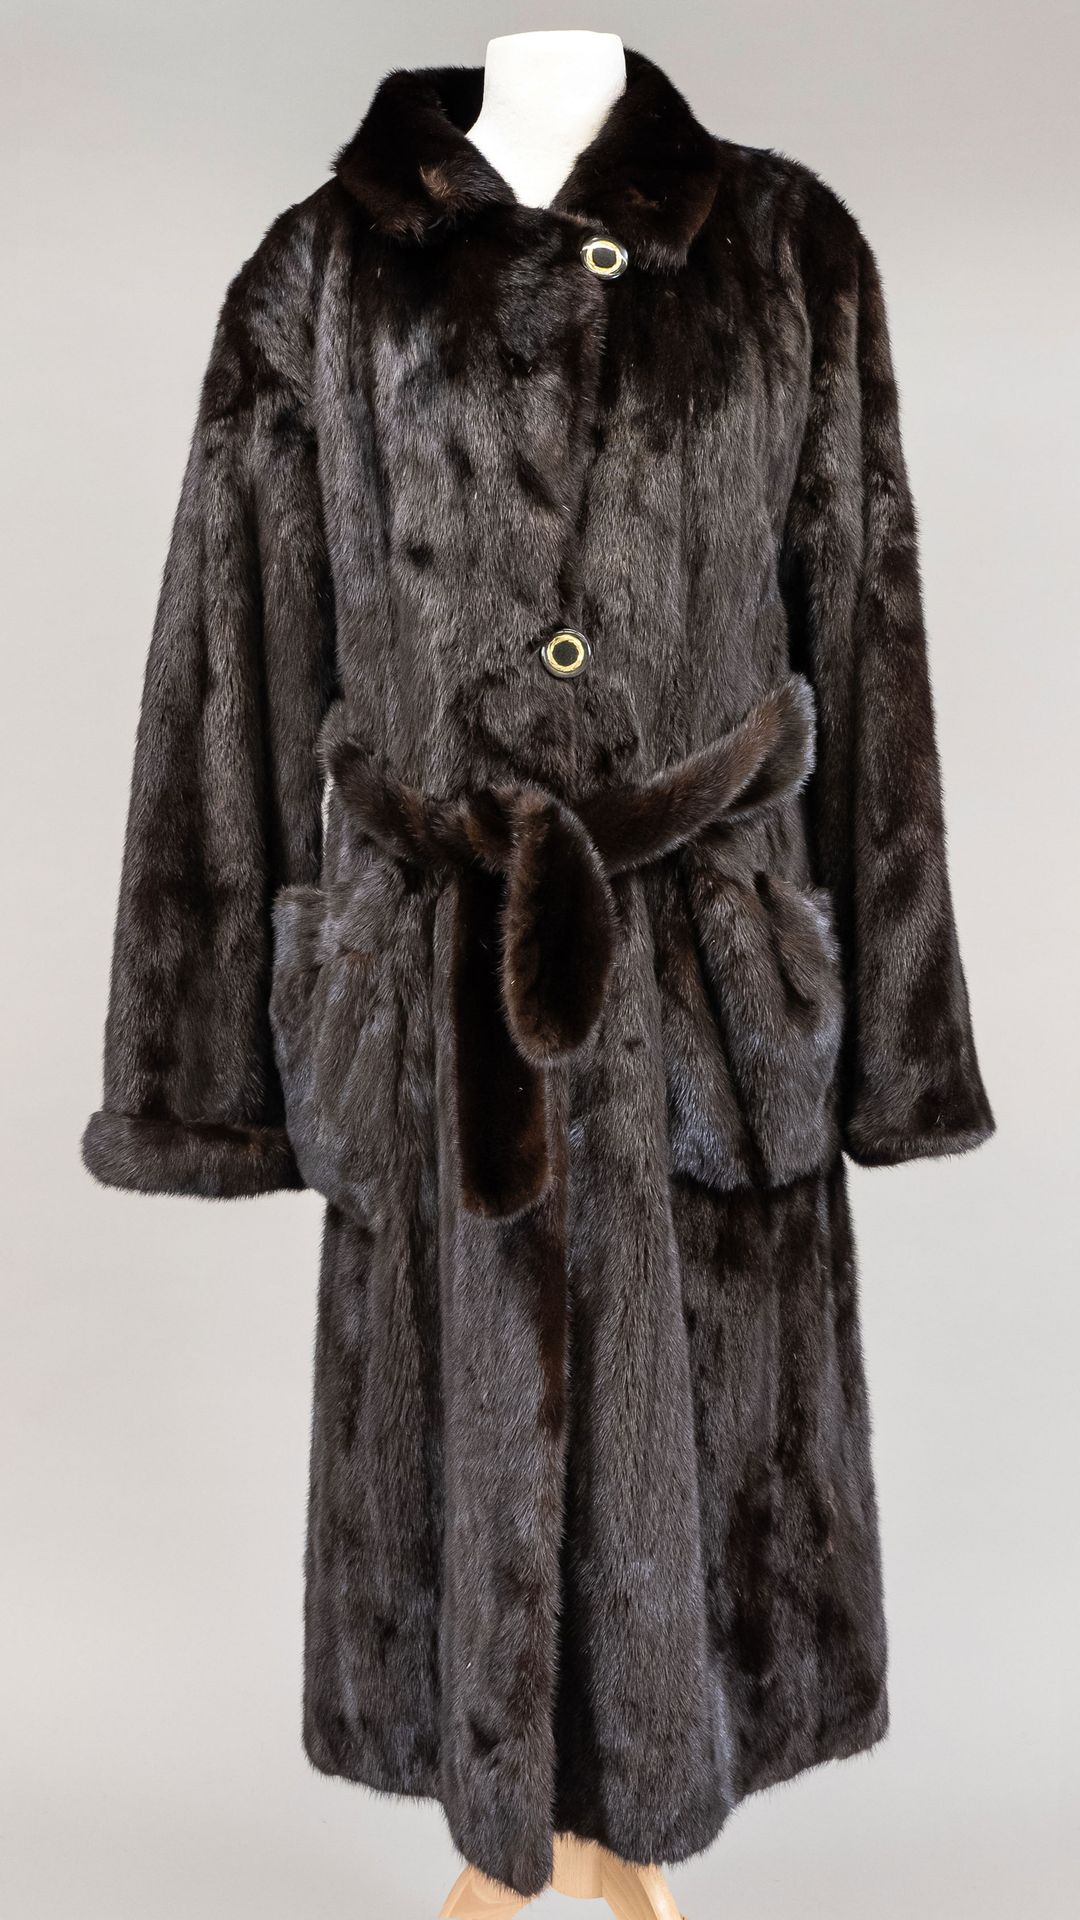 Null Ladies mink coat, without name or size indication, light traces of wear